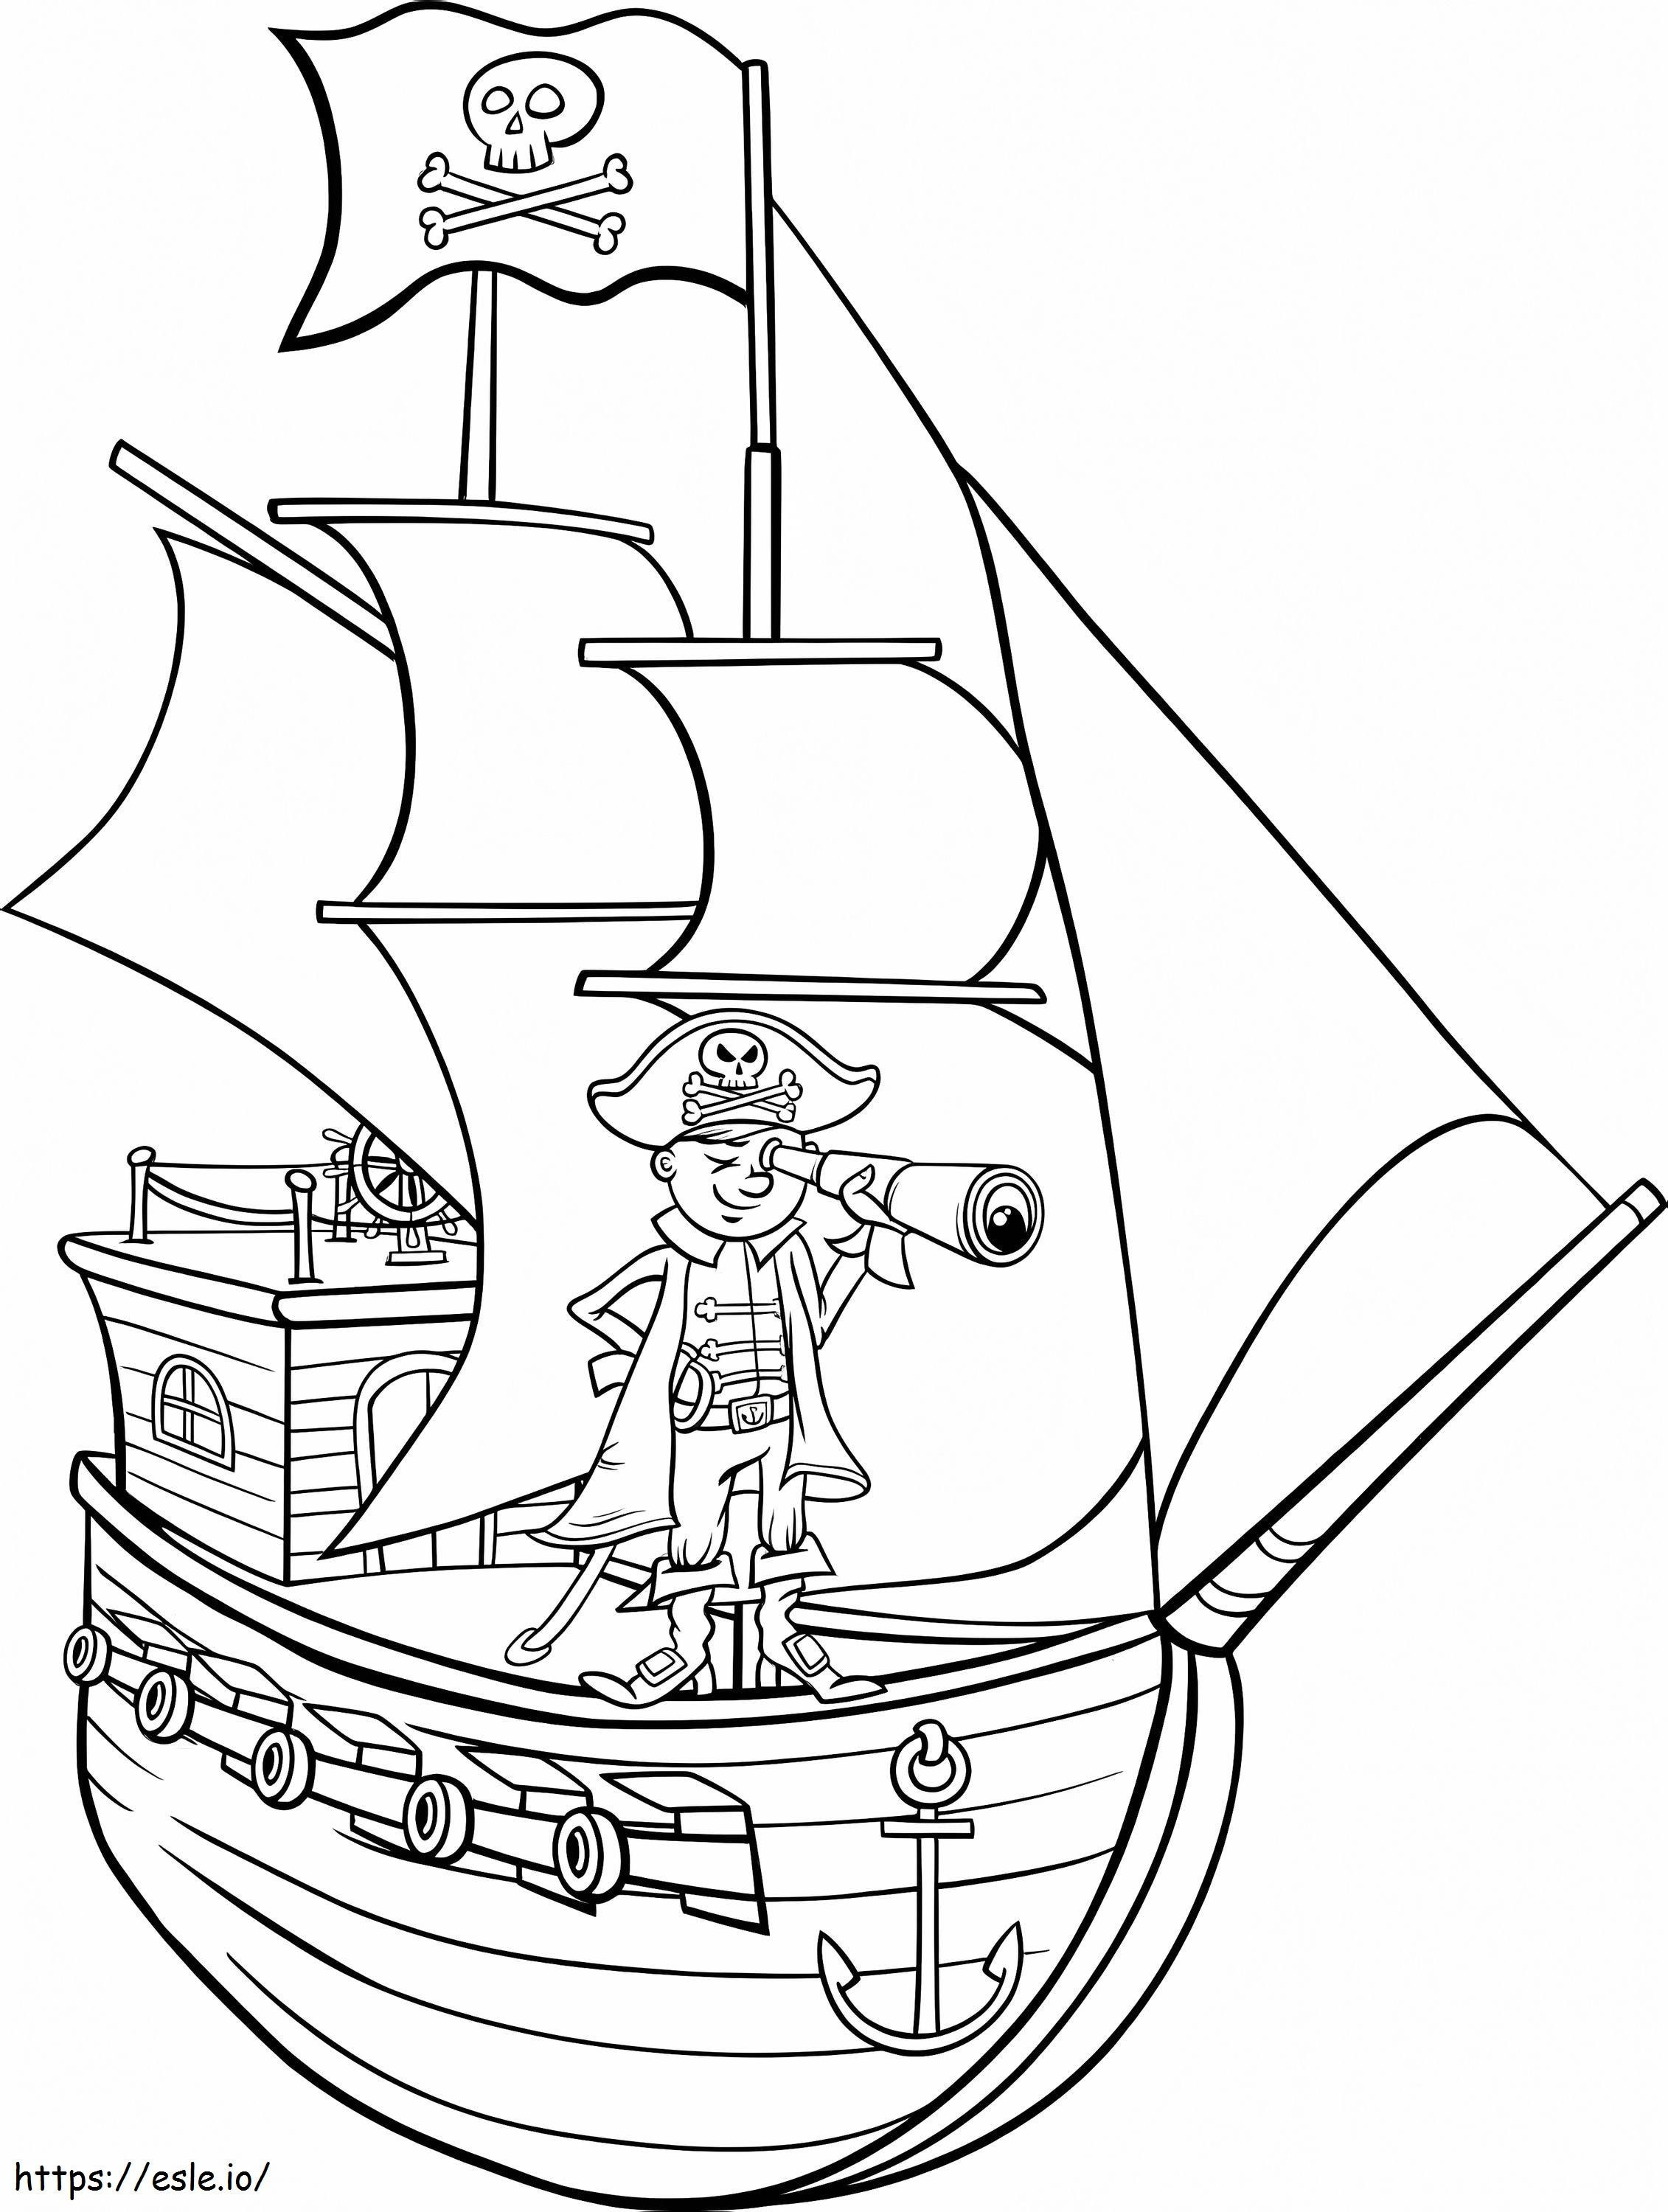 Pirate With Pirate Ship coloring page